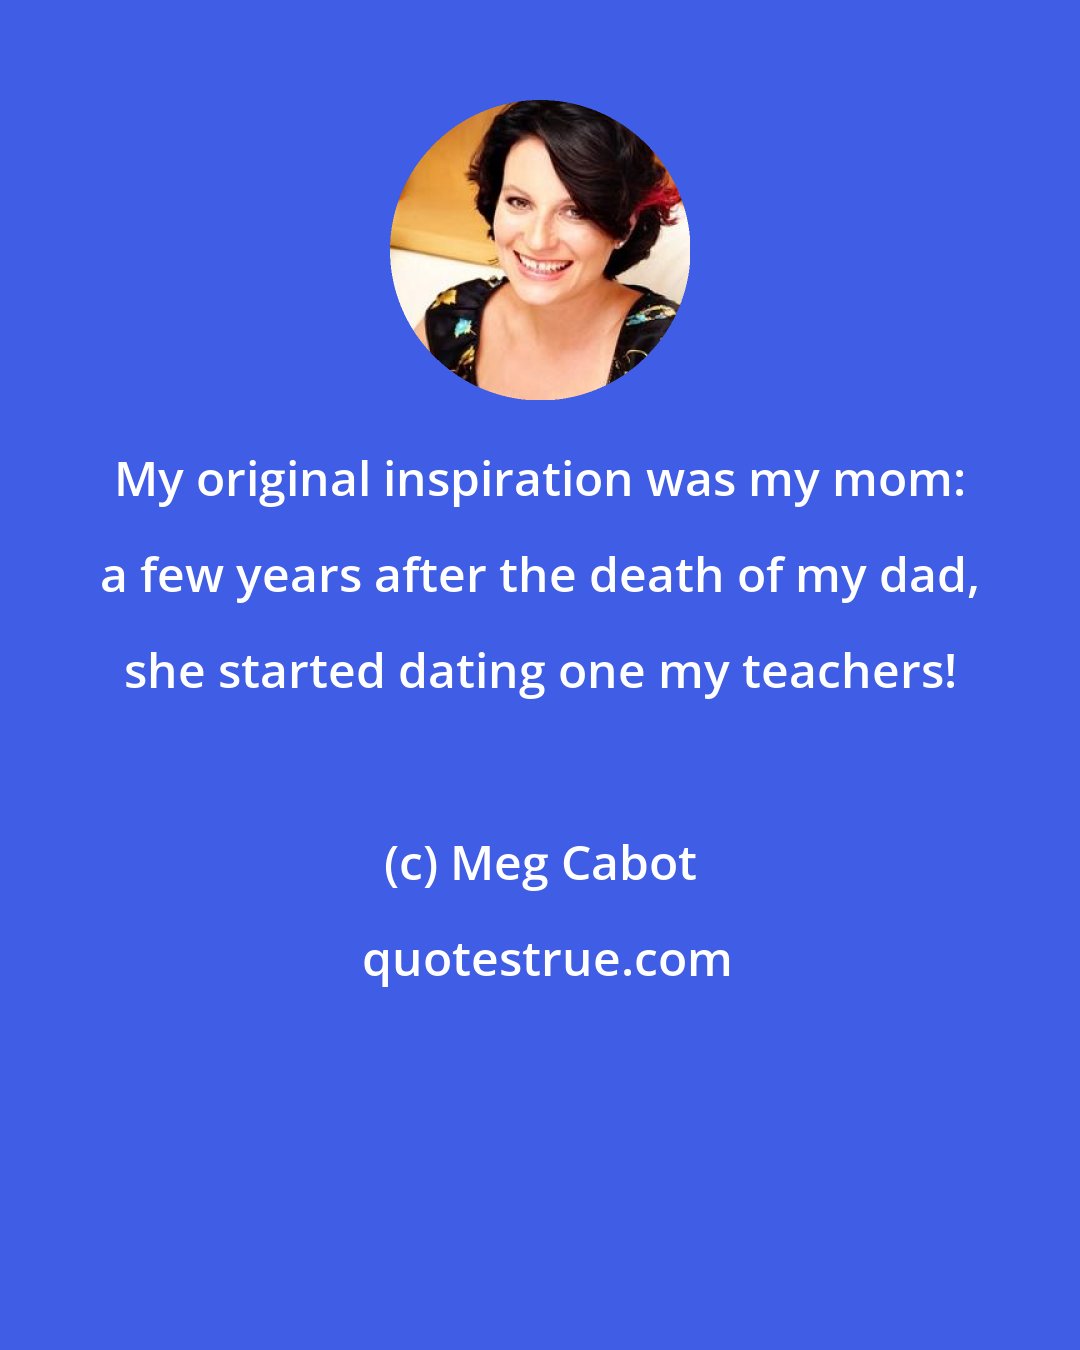 Meg Cabot: My original inspiration was my mom: a few years after the death of my dad, she started dating one my teachers!